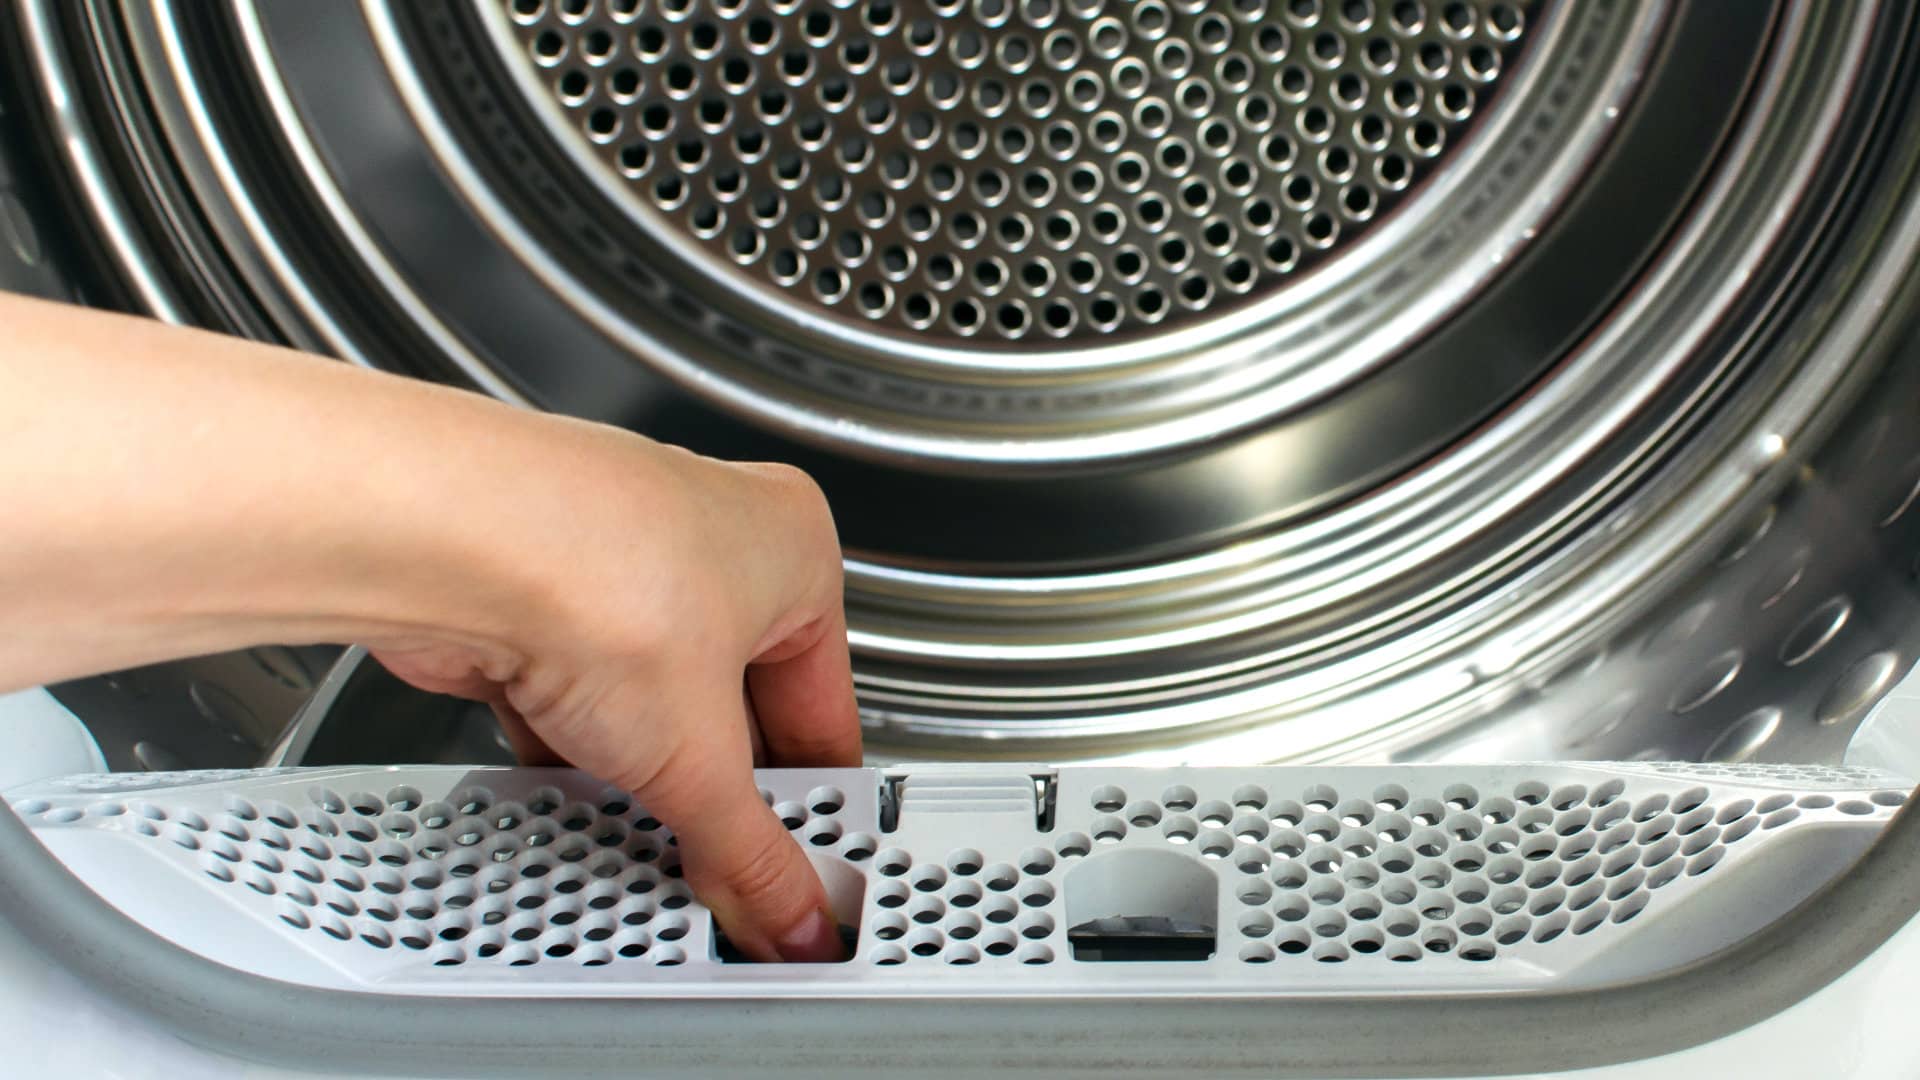 Frustrated By Your Amana Dryer Not Heating Up: Here